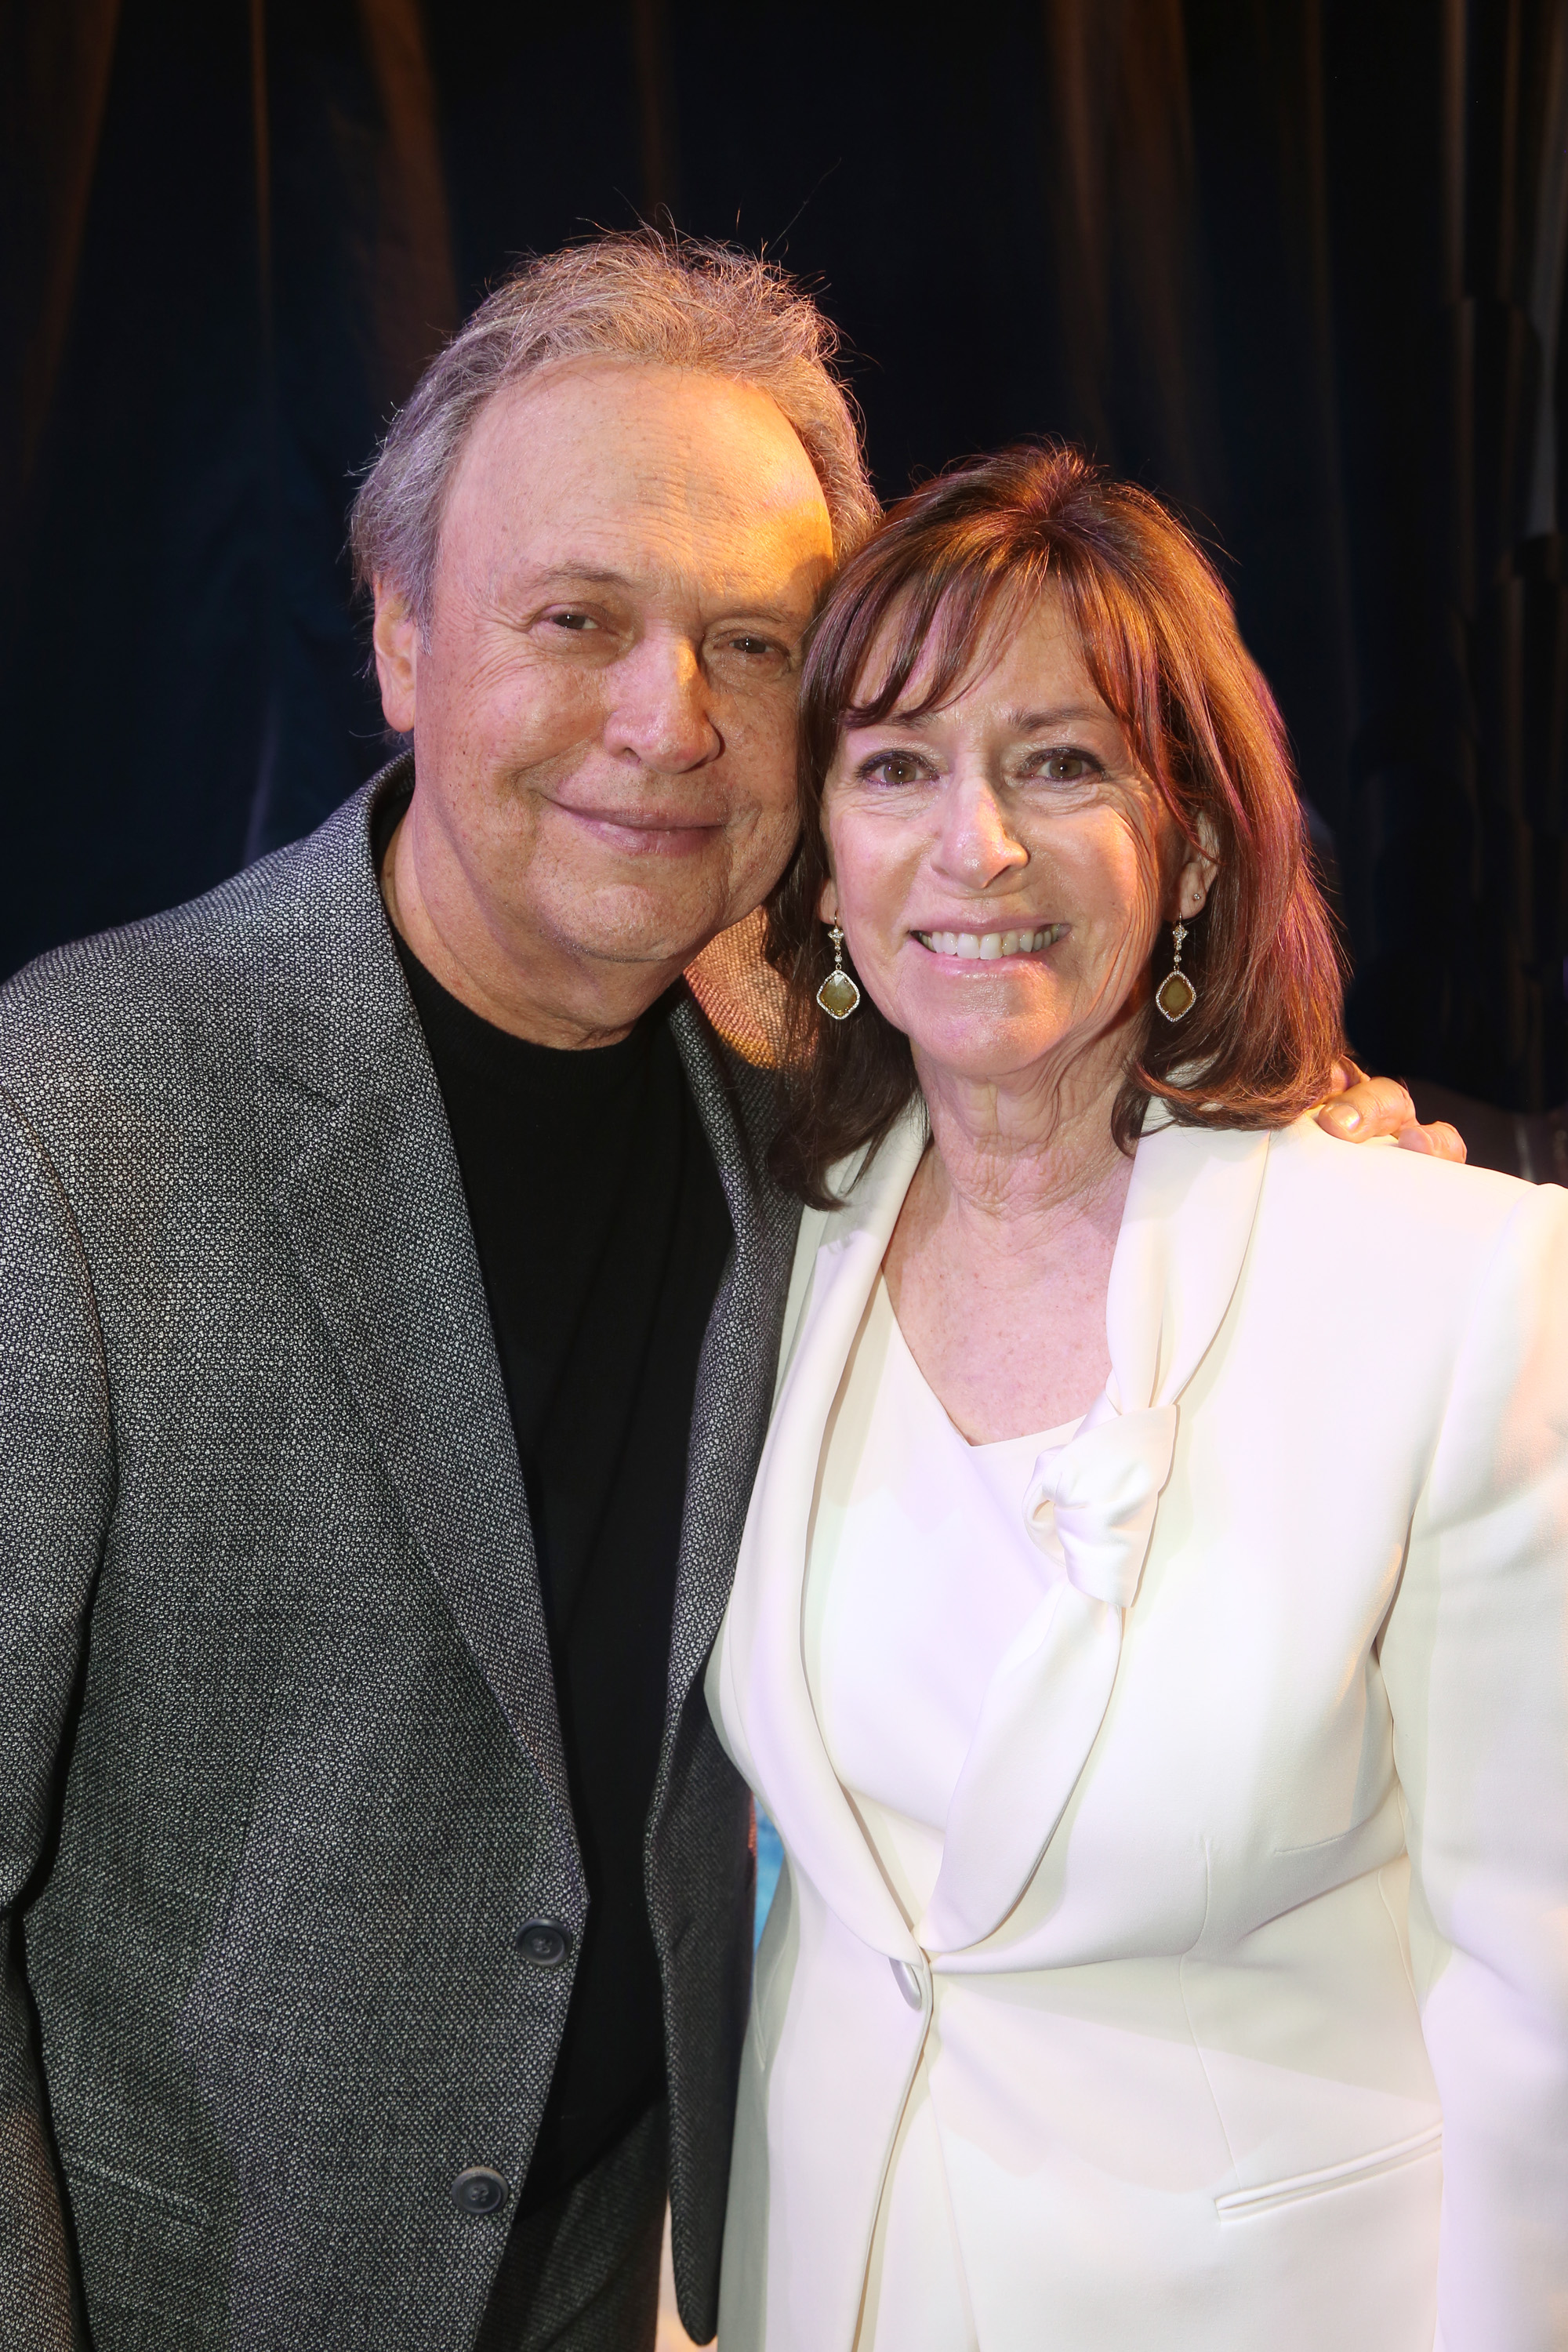 Billy and Janice Crystal pose backstage at the opening night of "Mr. Saturday Night" on Broadway at The Nederlander Theatre on April 27, 2022, in New York City | Source: Getty Images